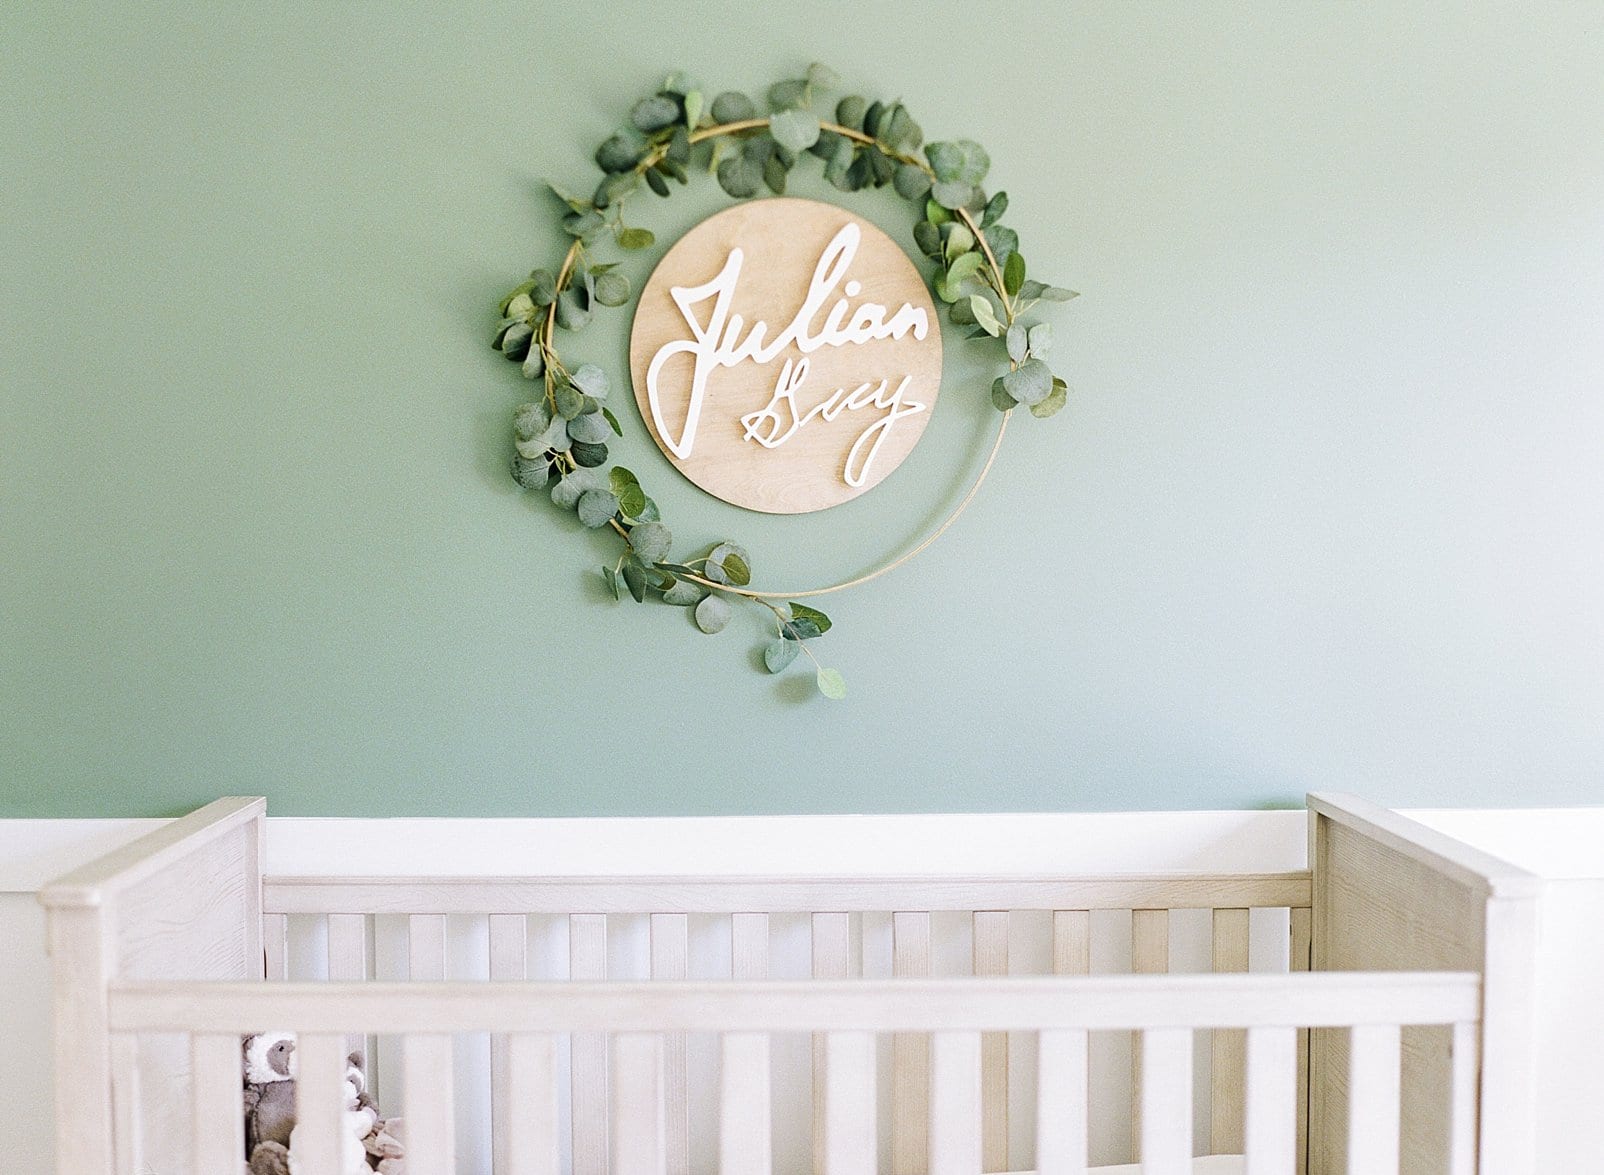 Raleigh nursery film session with a white crib and wooden circle sign hanging above it outlined in ivy photo